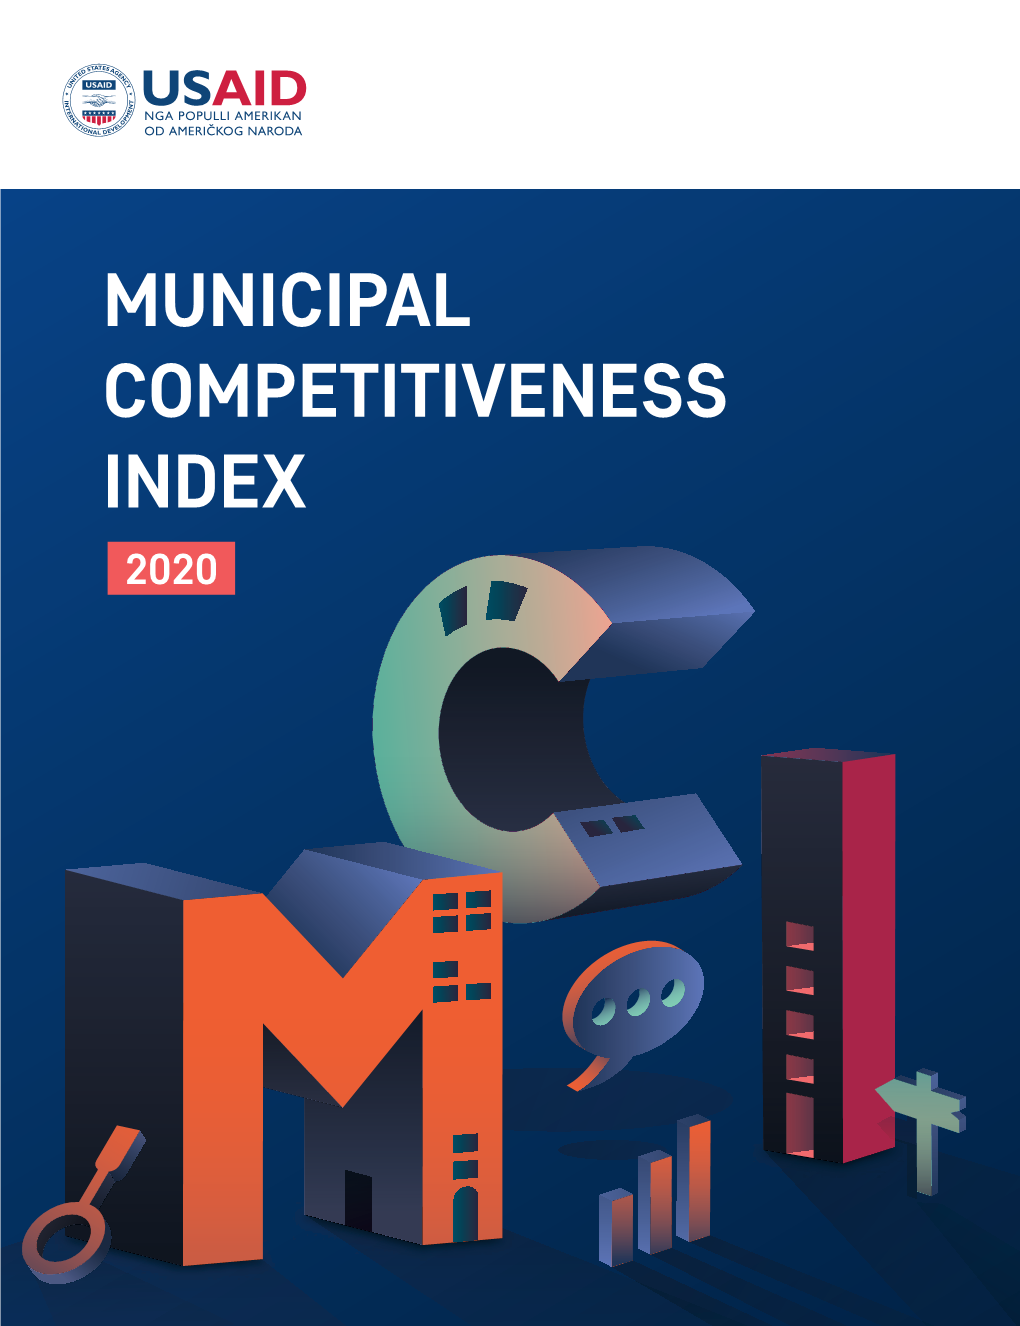 The Municipal Competitiveness Index 2020